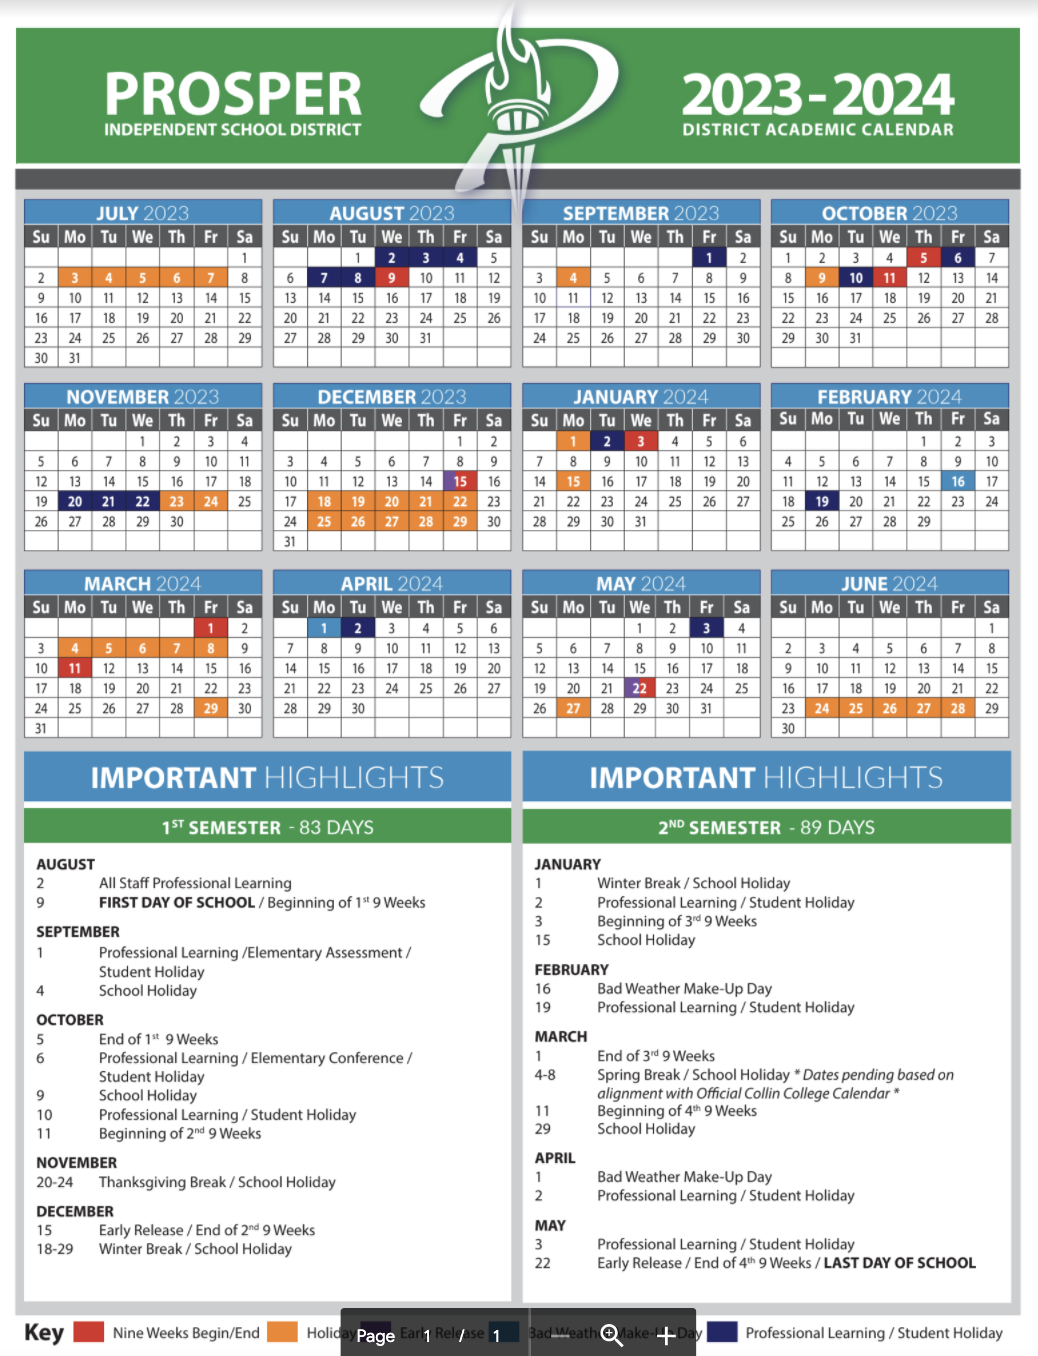 Plano Isd 2022 23 Calendar Here Are Prosper Isd's School Calendars For The 2022-2023 And The 2023-2024  School Years | Cities | Checkoutdfw.com